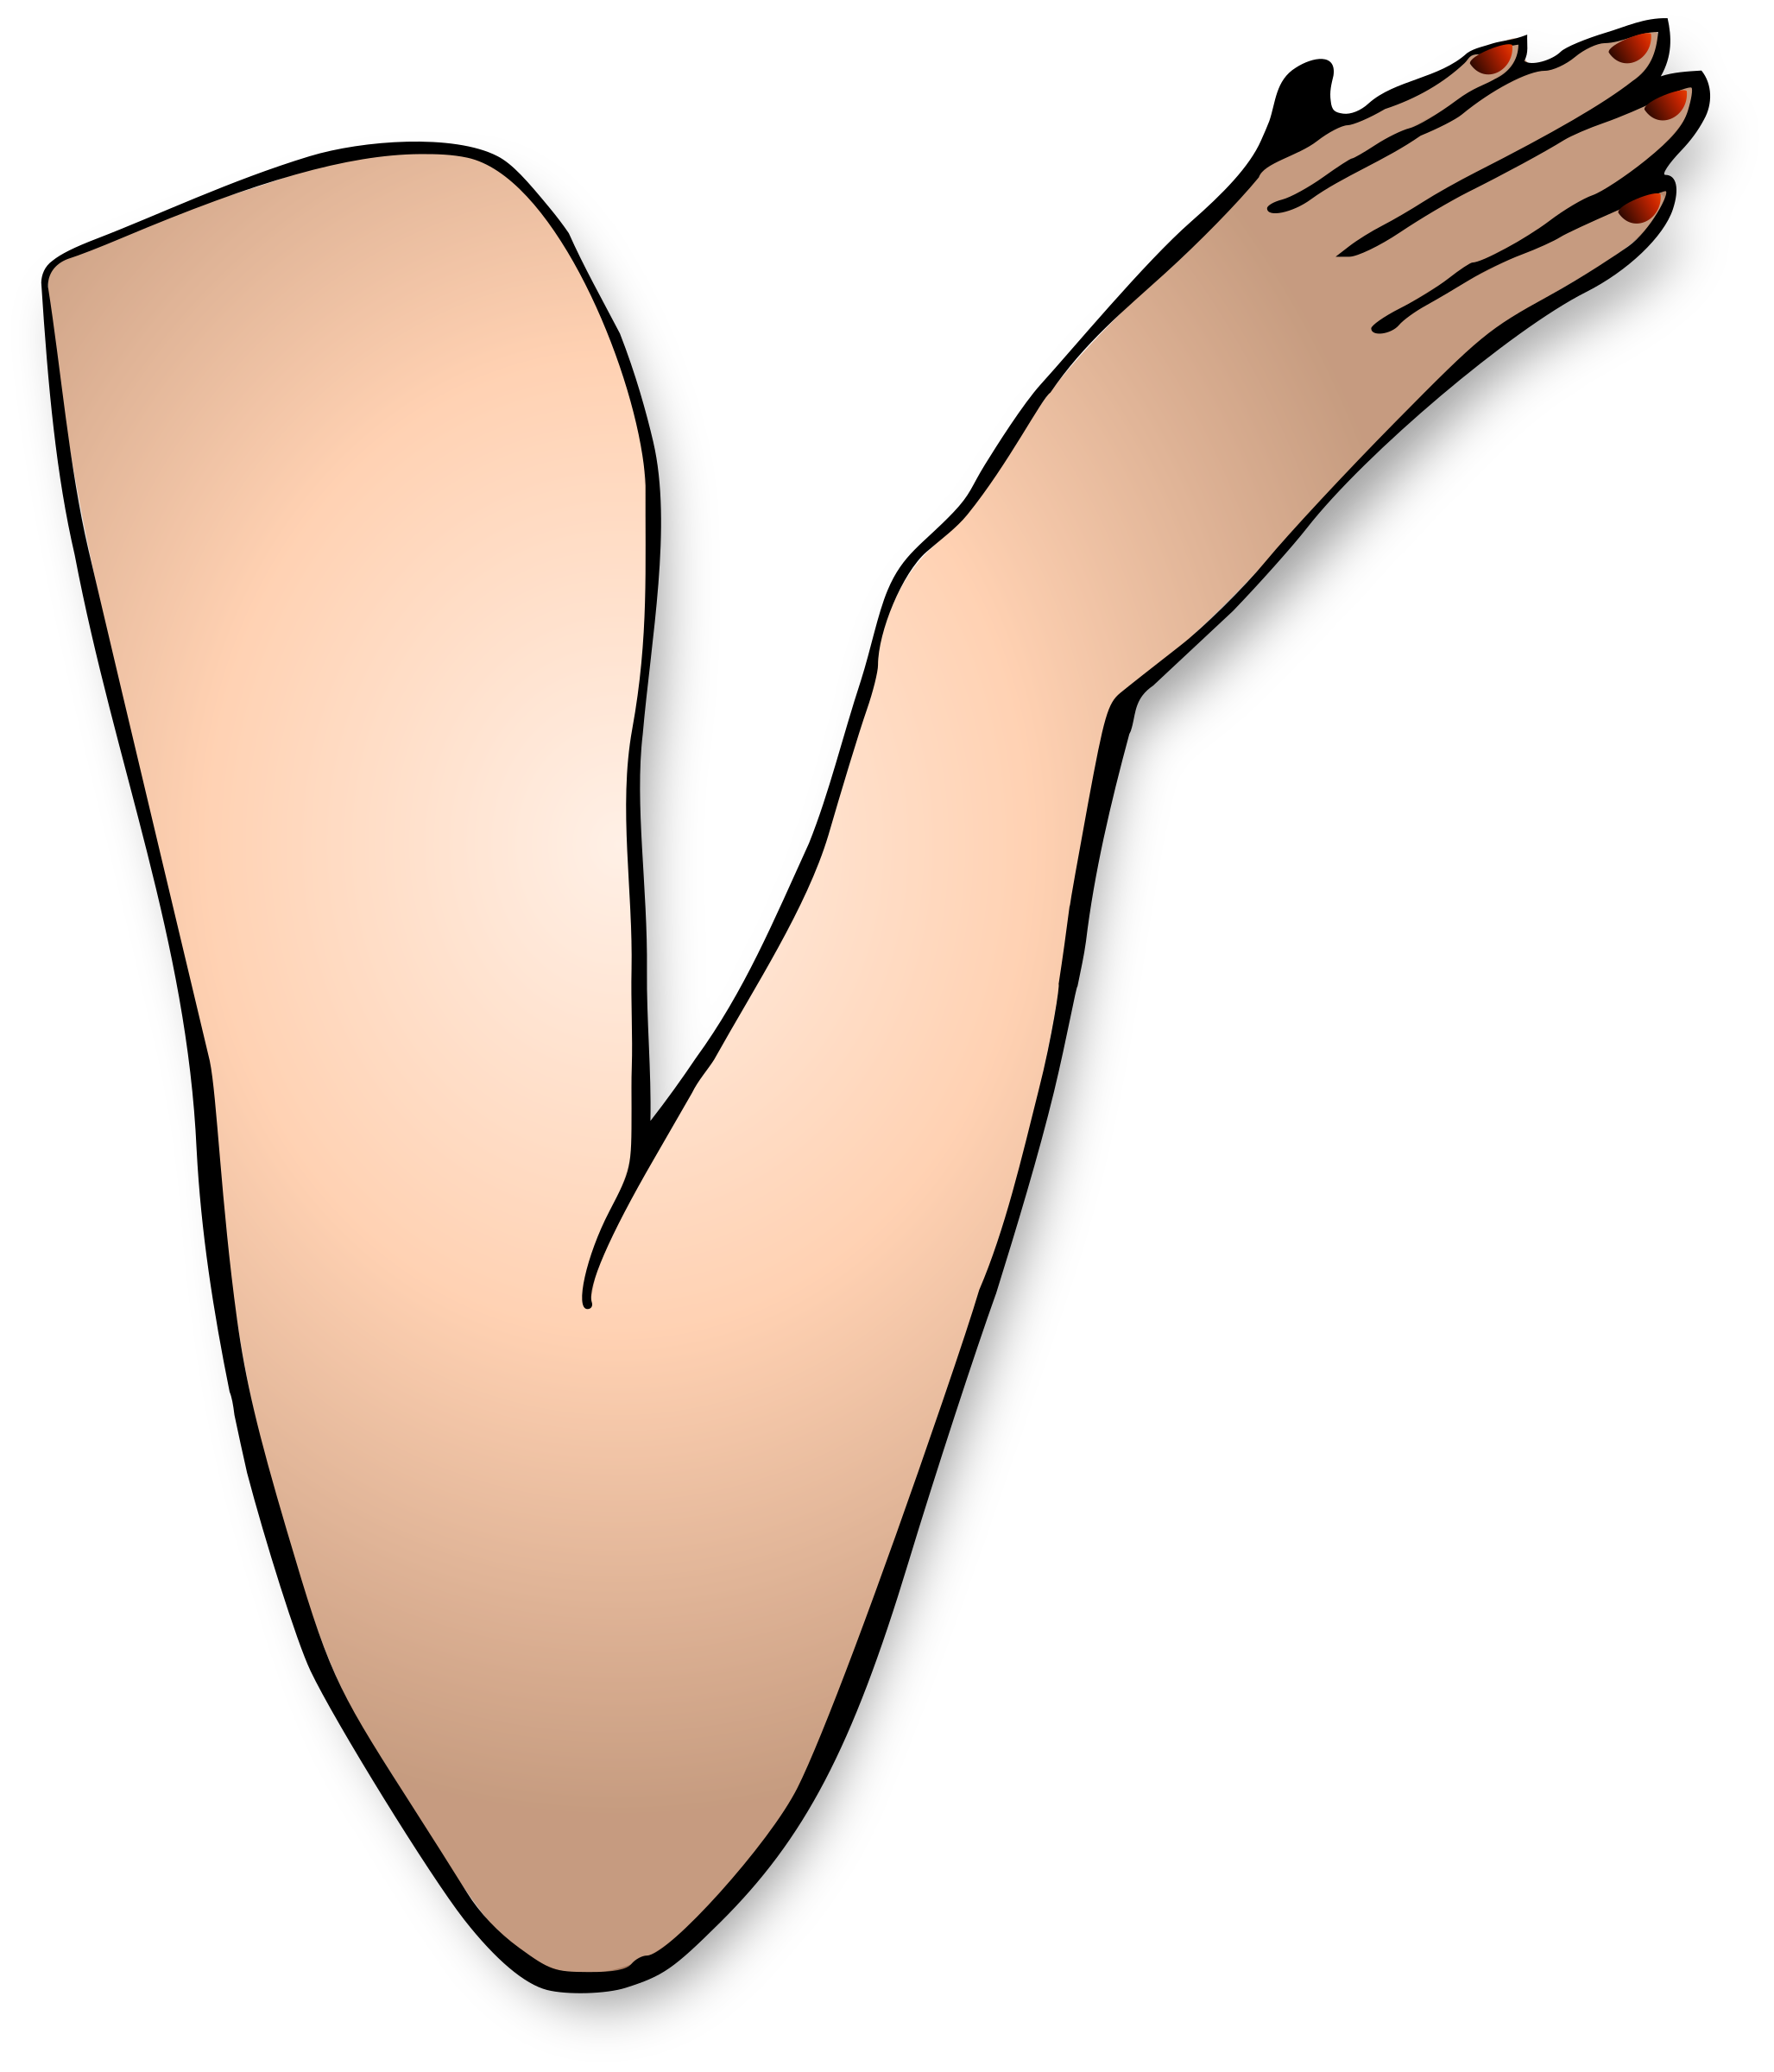 Hand clipart arm, Hand arm Transparent FREE for download on